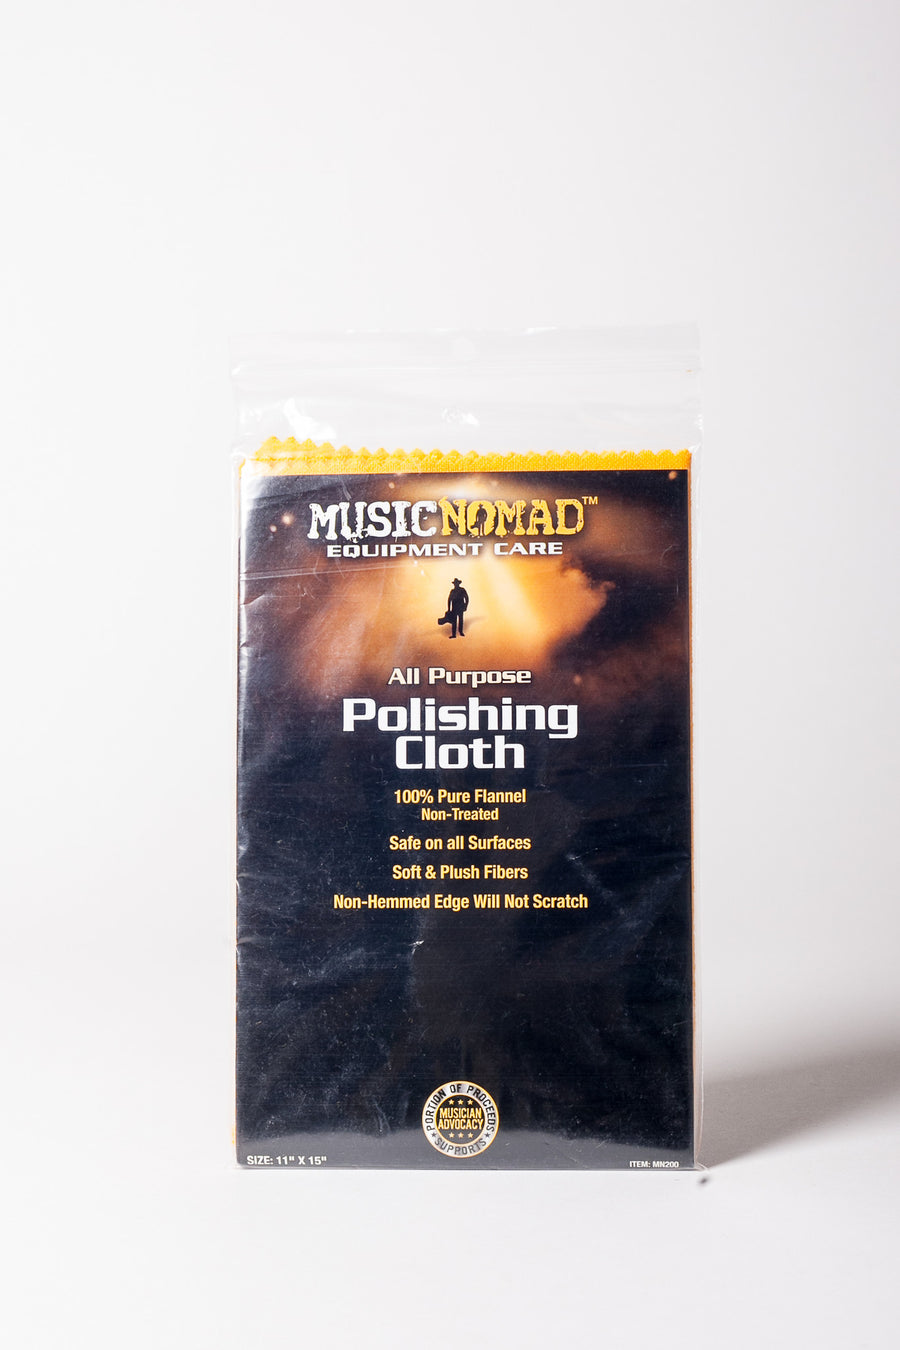 Music Nomad MN200 All Purpose Edgeless 100% Pure Flannel Non-Treated Polishing Cloth